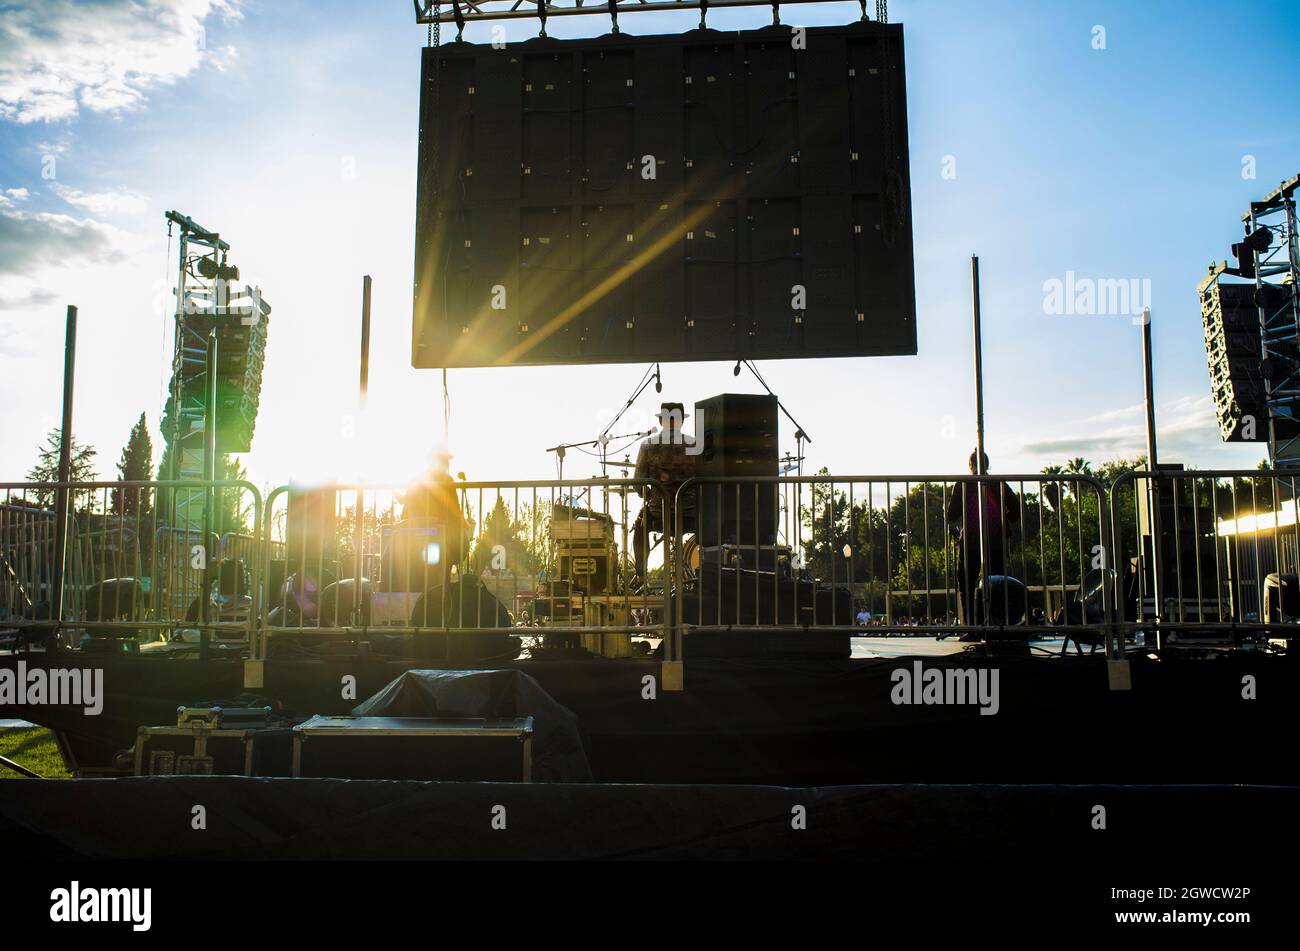 Rock daylight performance seen from rear stage. Sunset blue sky background Stock Photo